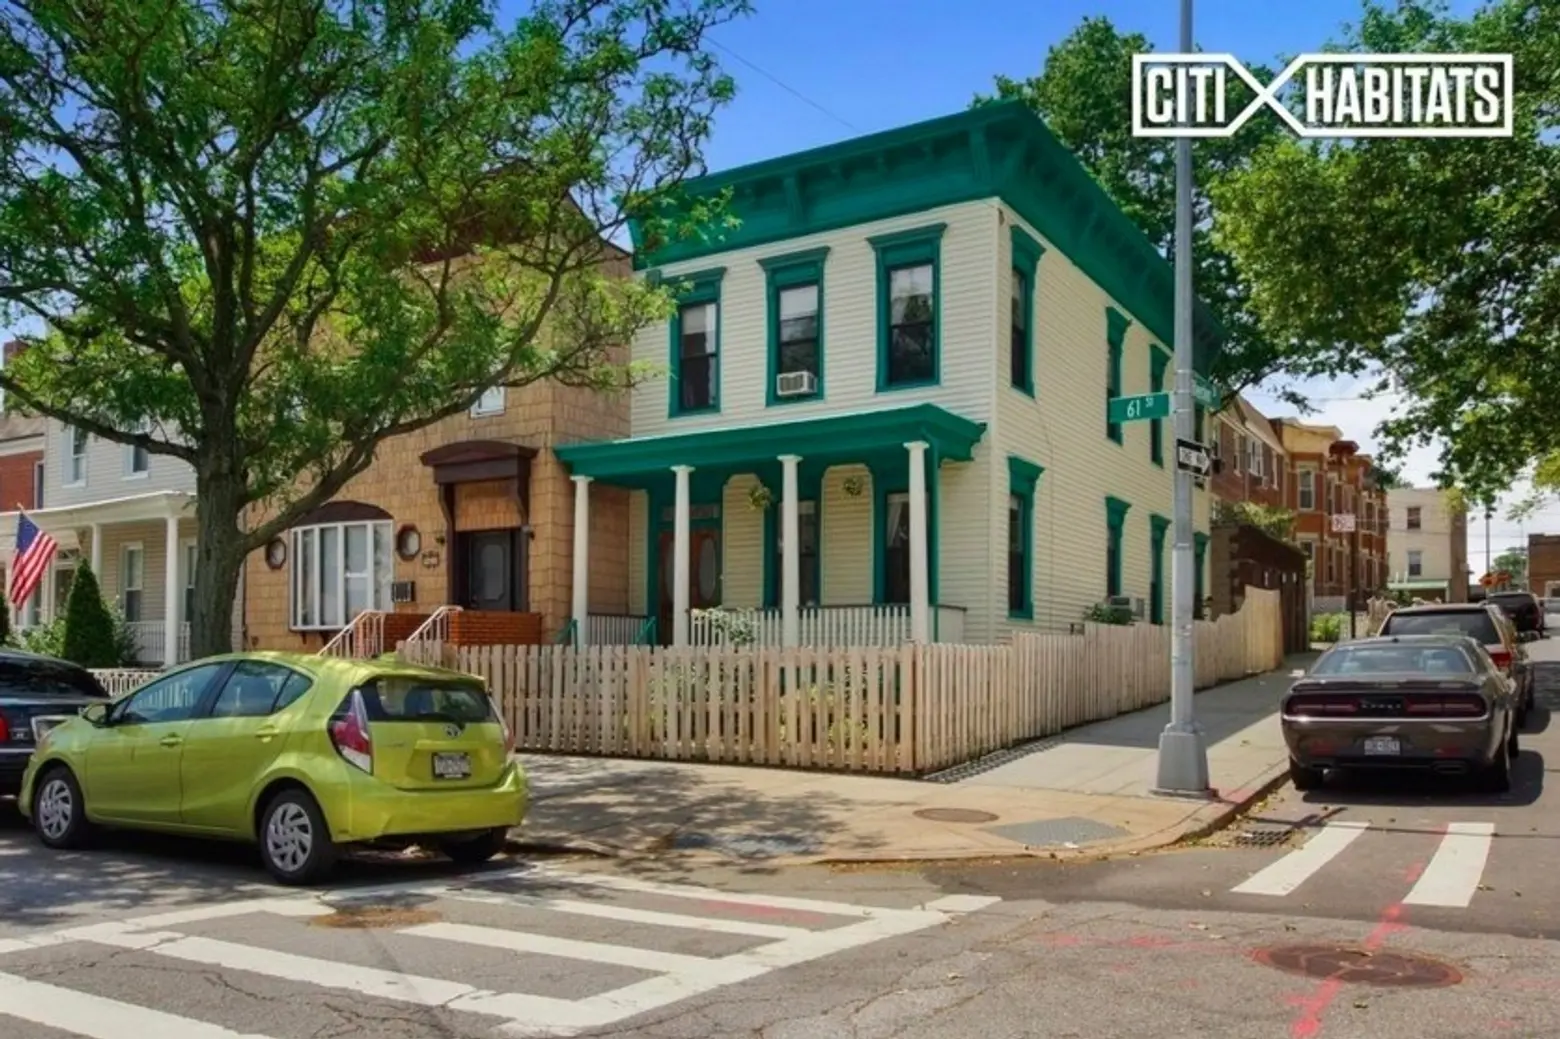 $850K for this 1899 Victorian home in Ridgewood with a charming front porch